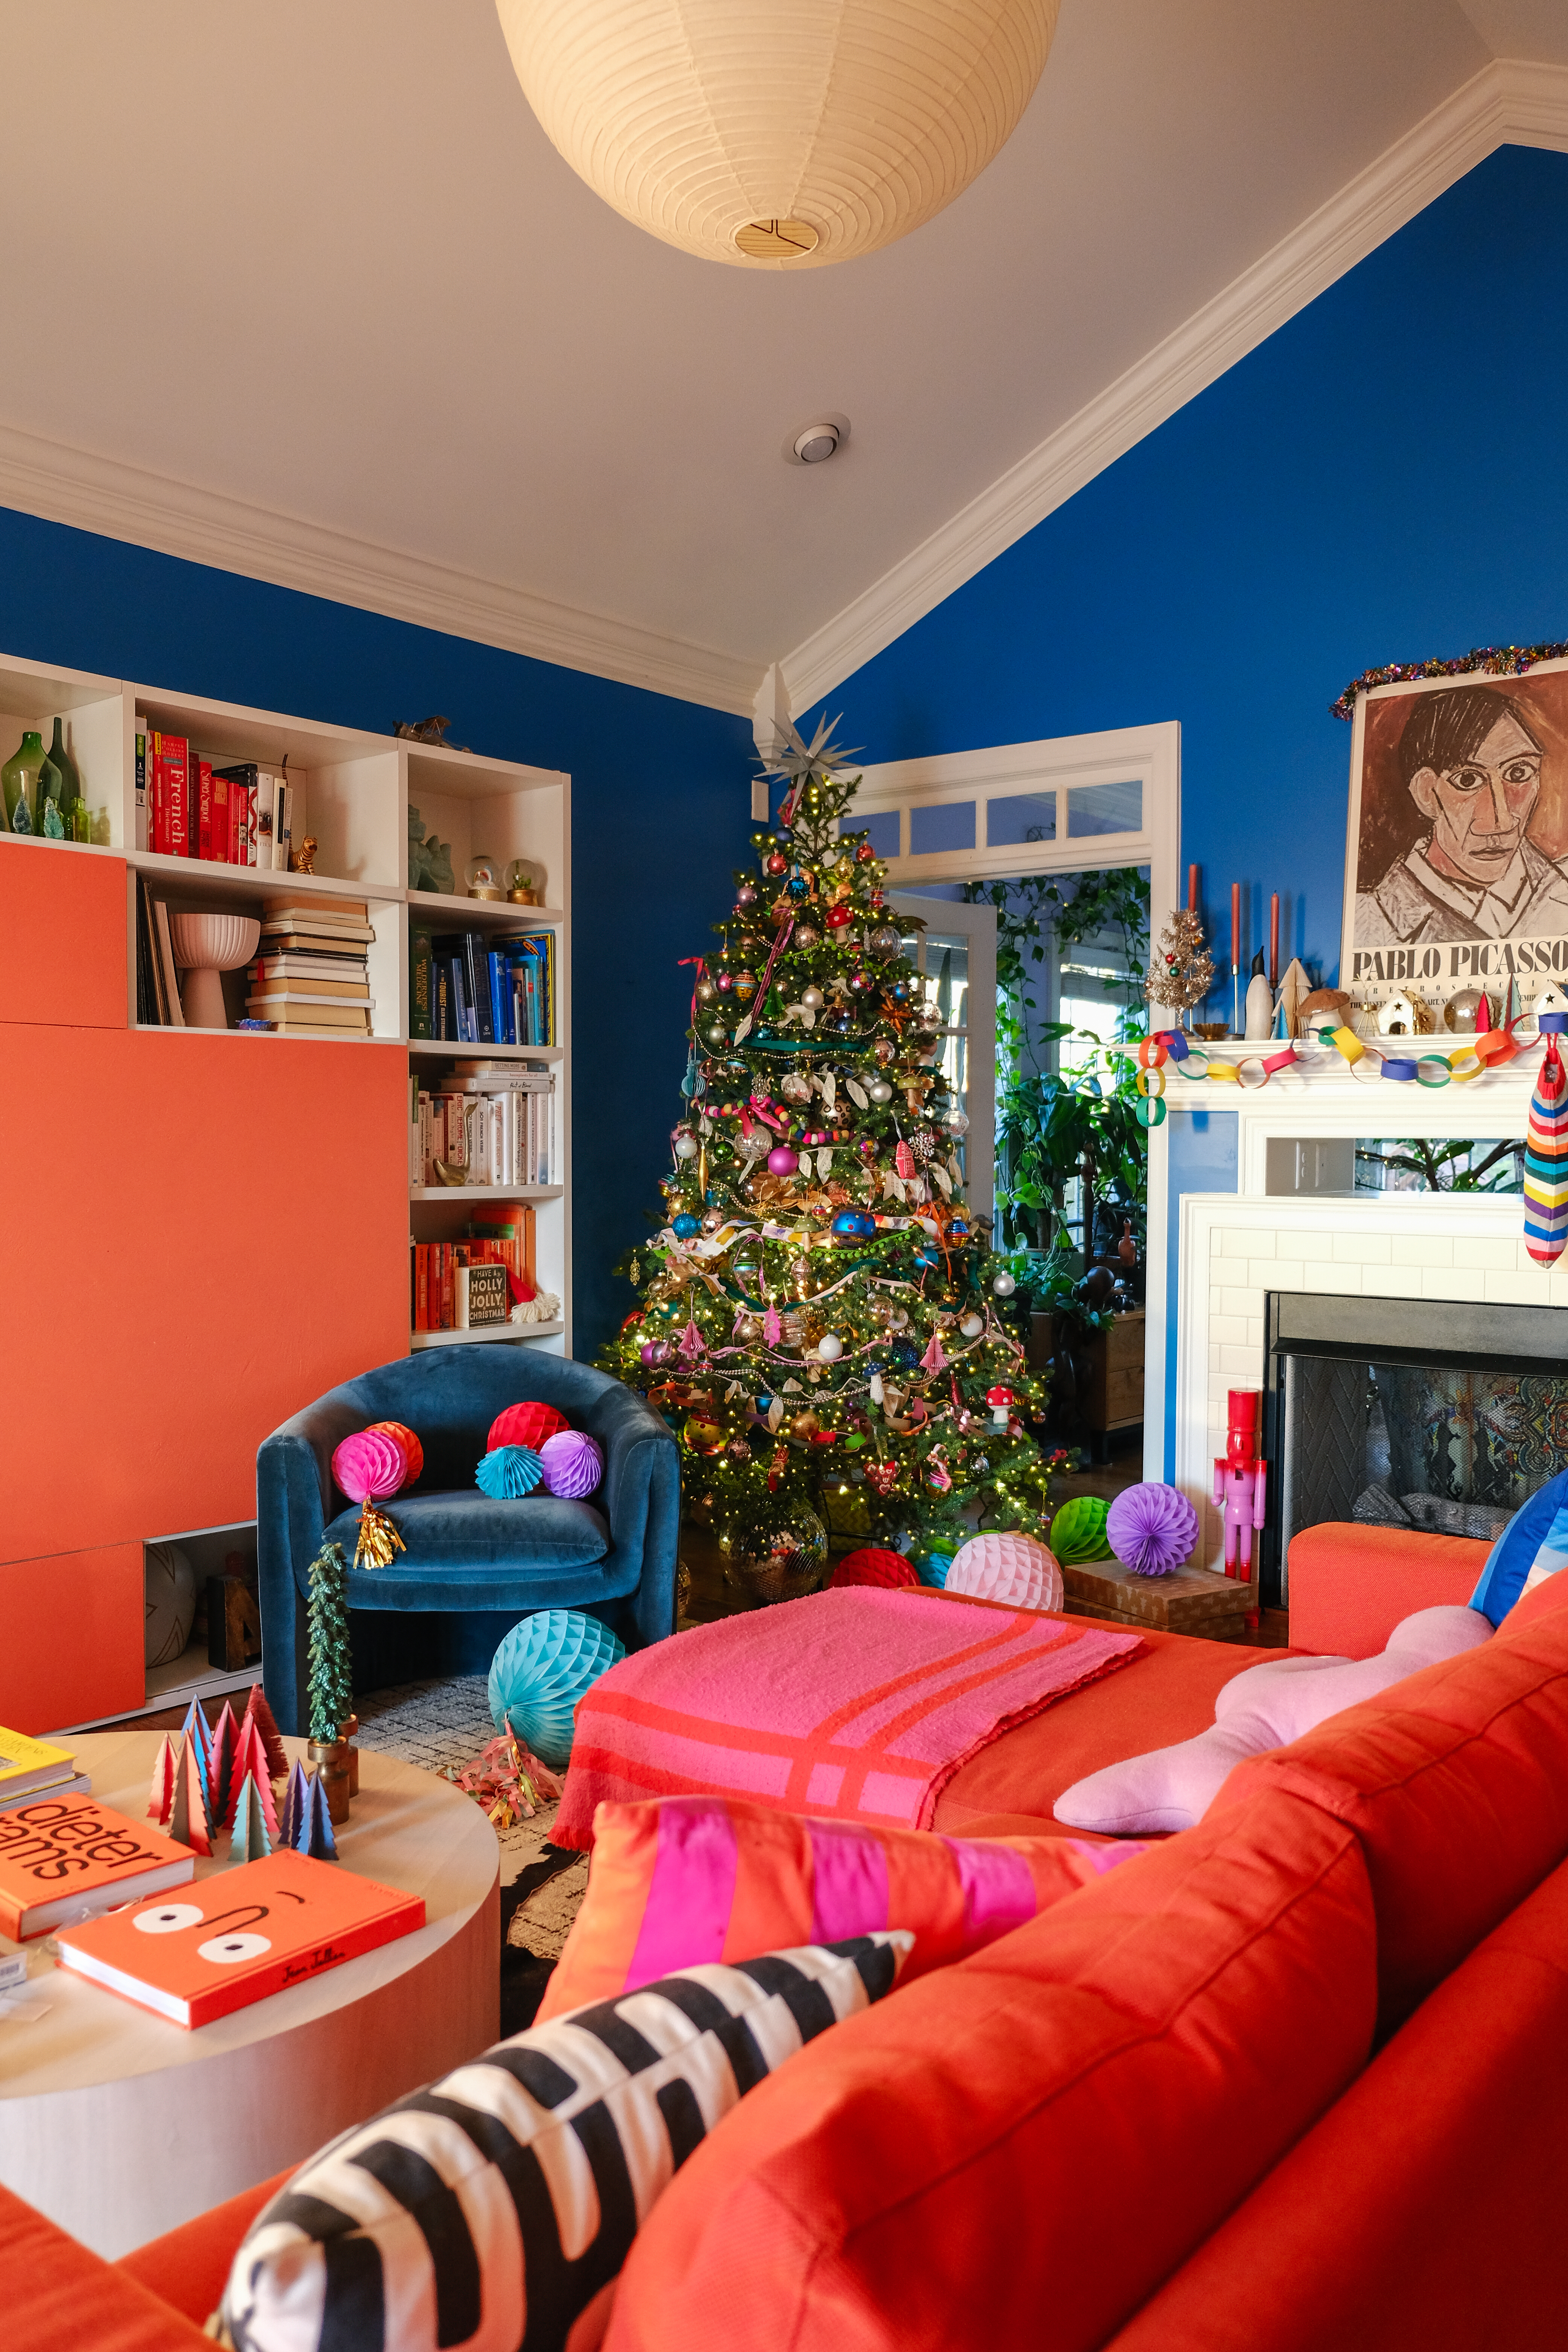 Christmas tree decorated with colorful vintage ornaments